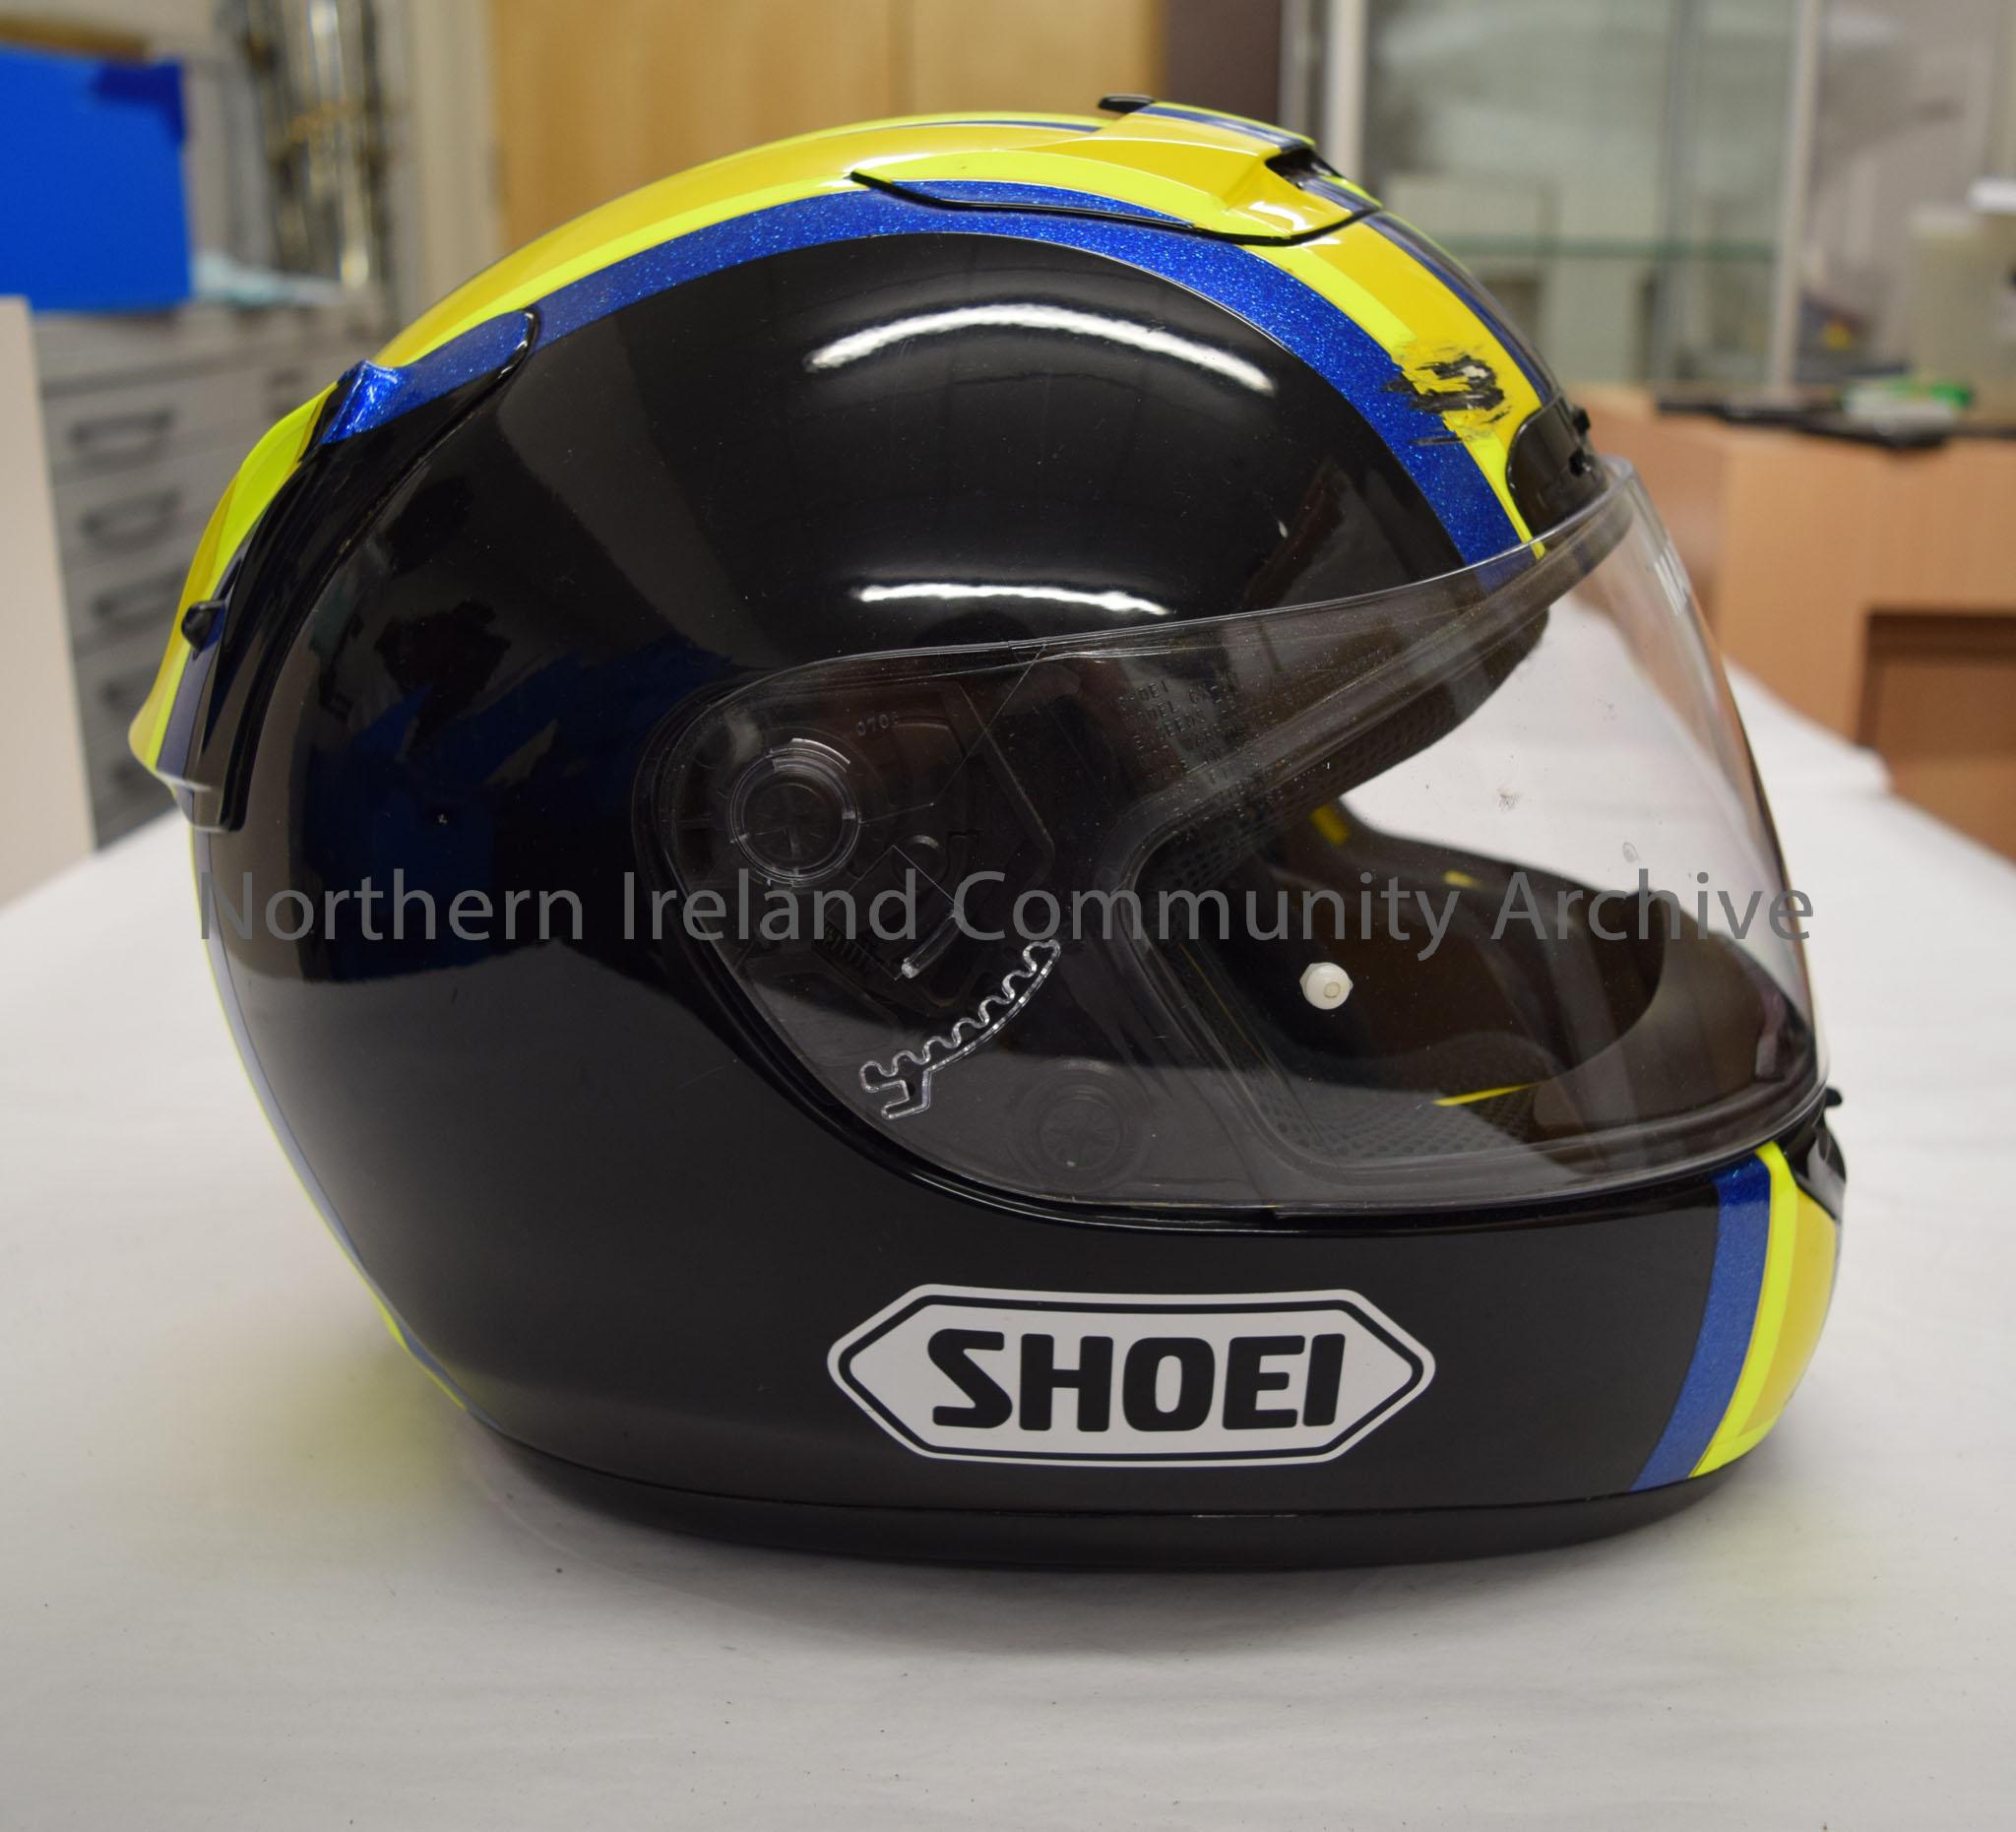 Shoei motorcycle helmet belonging to Marty Nutt. Black helmet with a yellow, fluorescent yellow and sparkly blue “M” pattern on the top.  – 2016.84 (5)